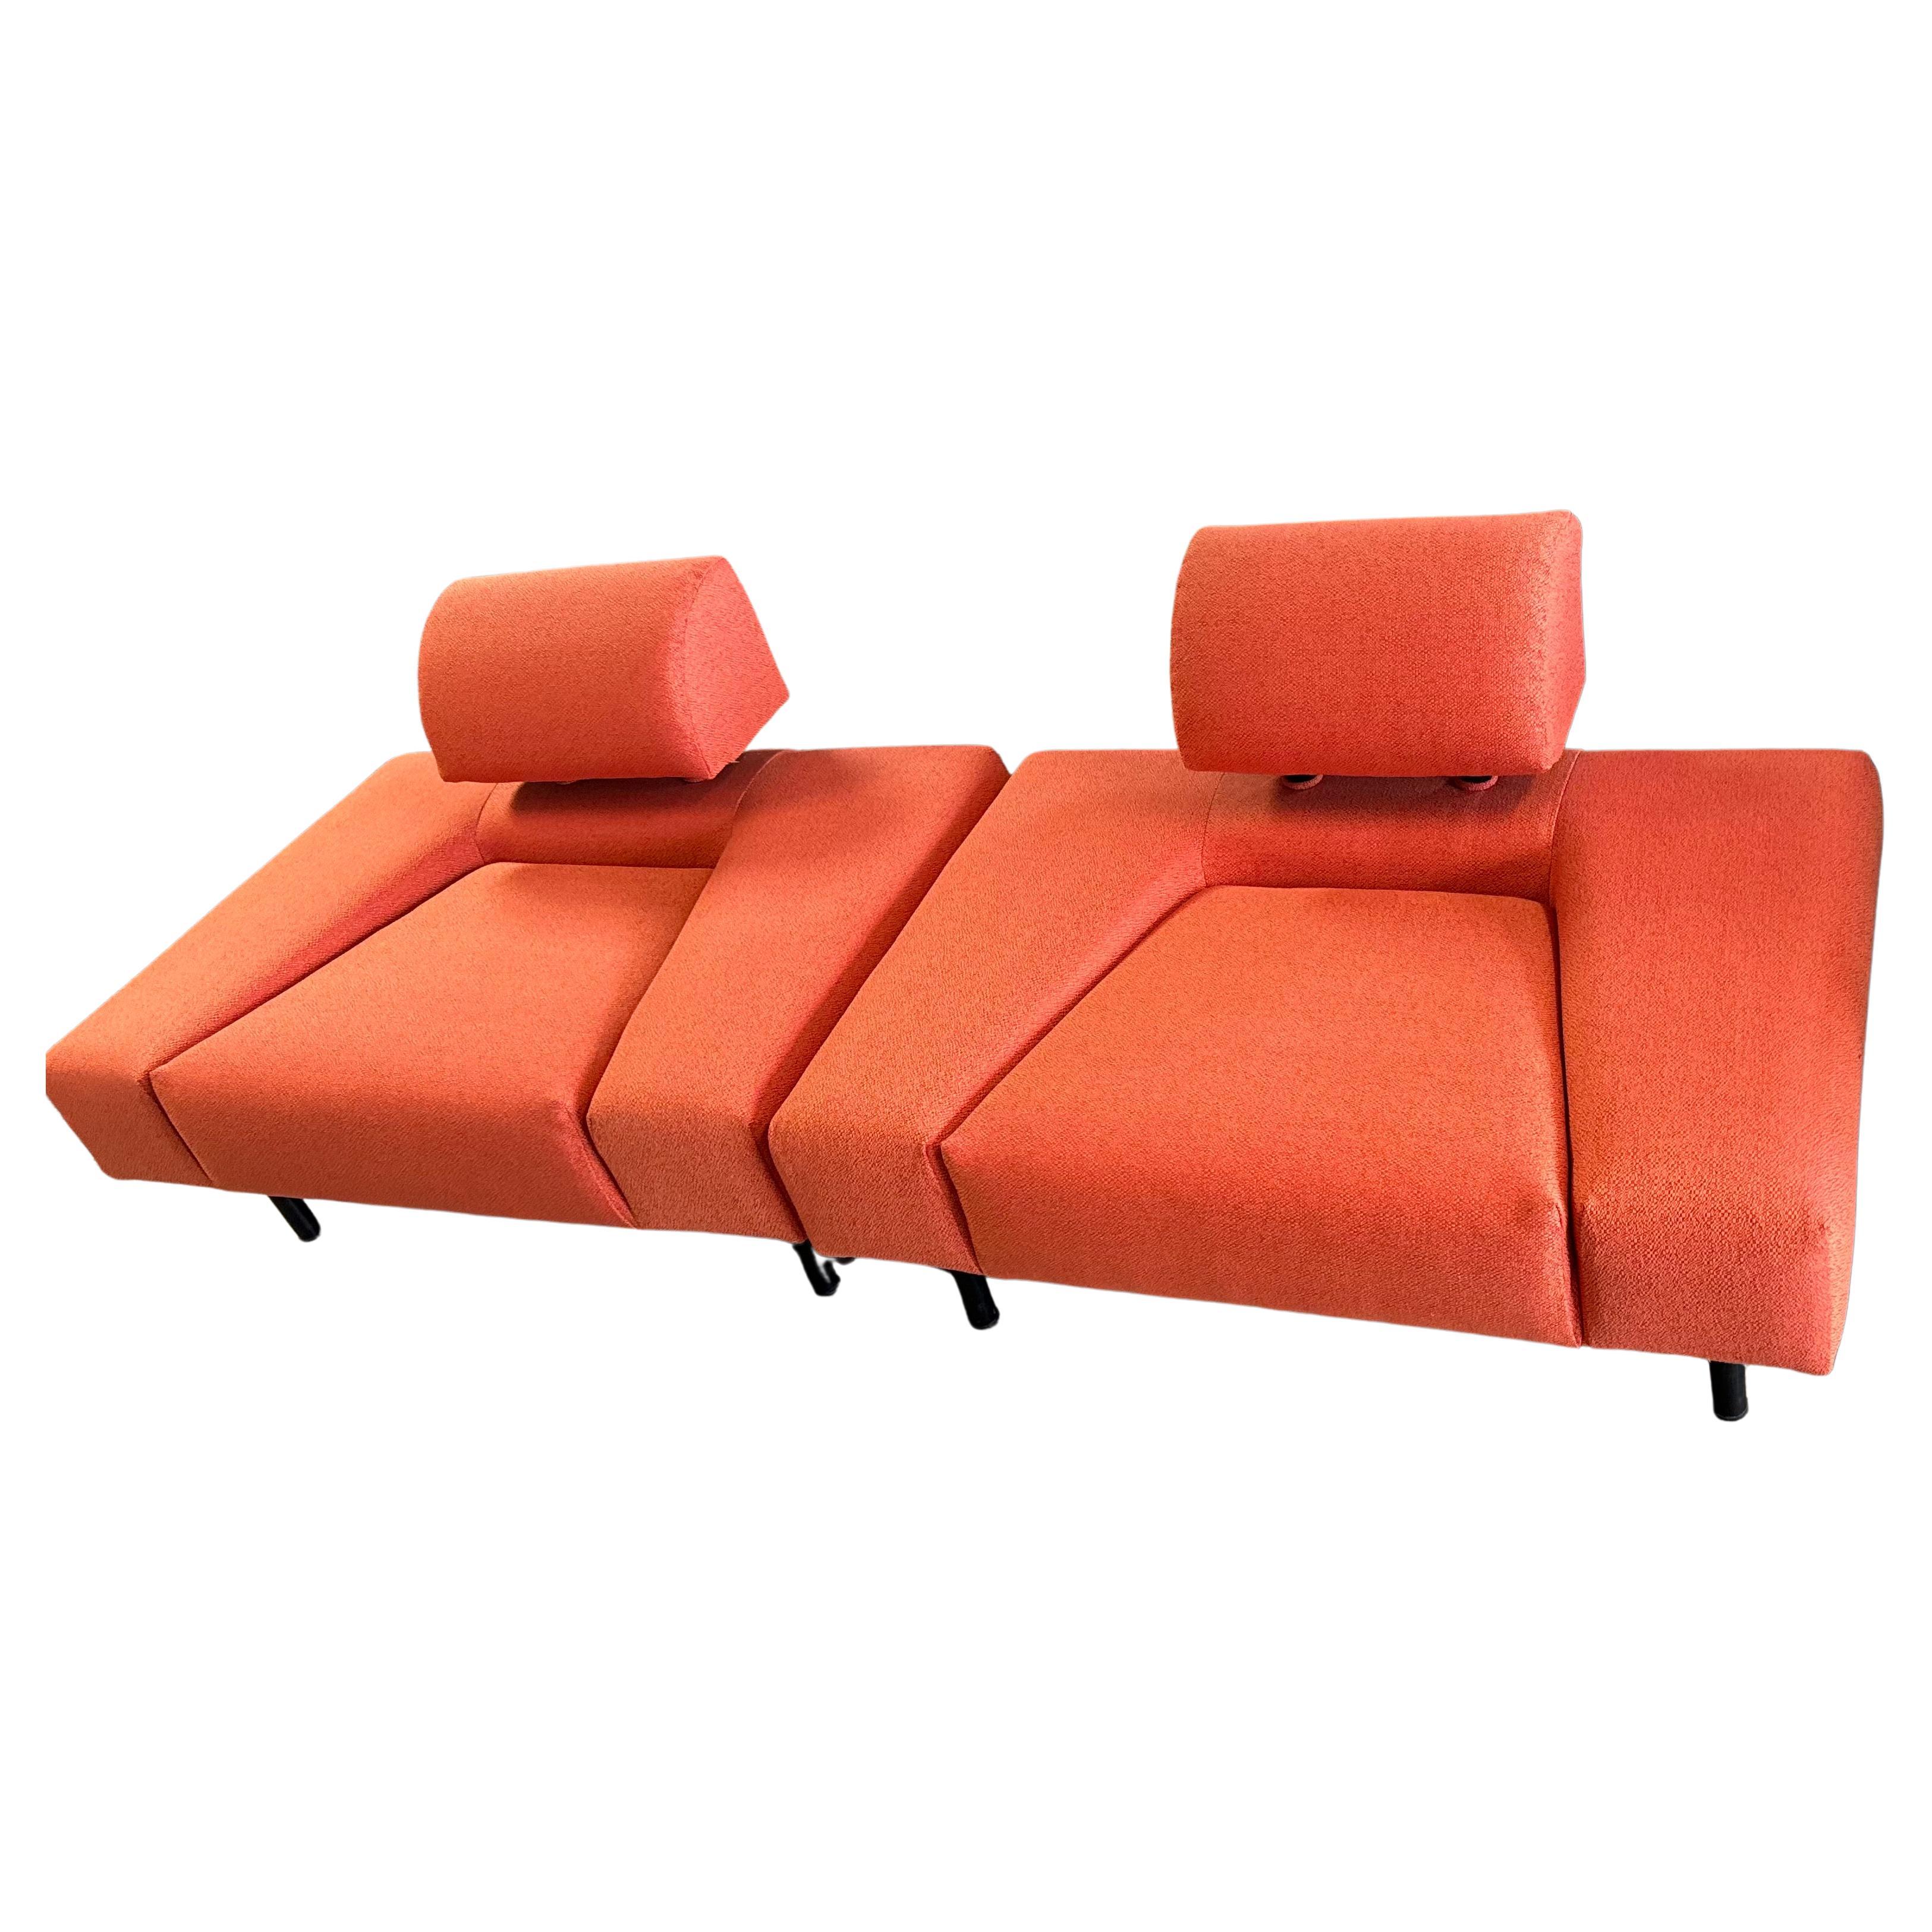 Pair of Rob Eckhardt Pouf Garni Space Age upholstered in orange  For Sale